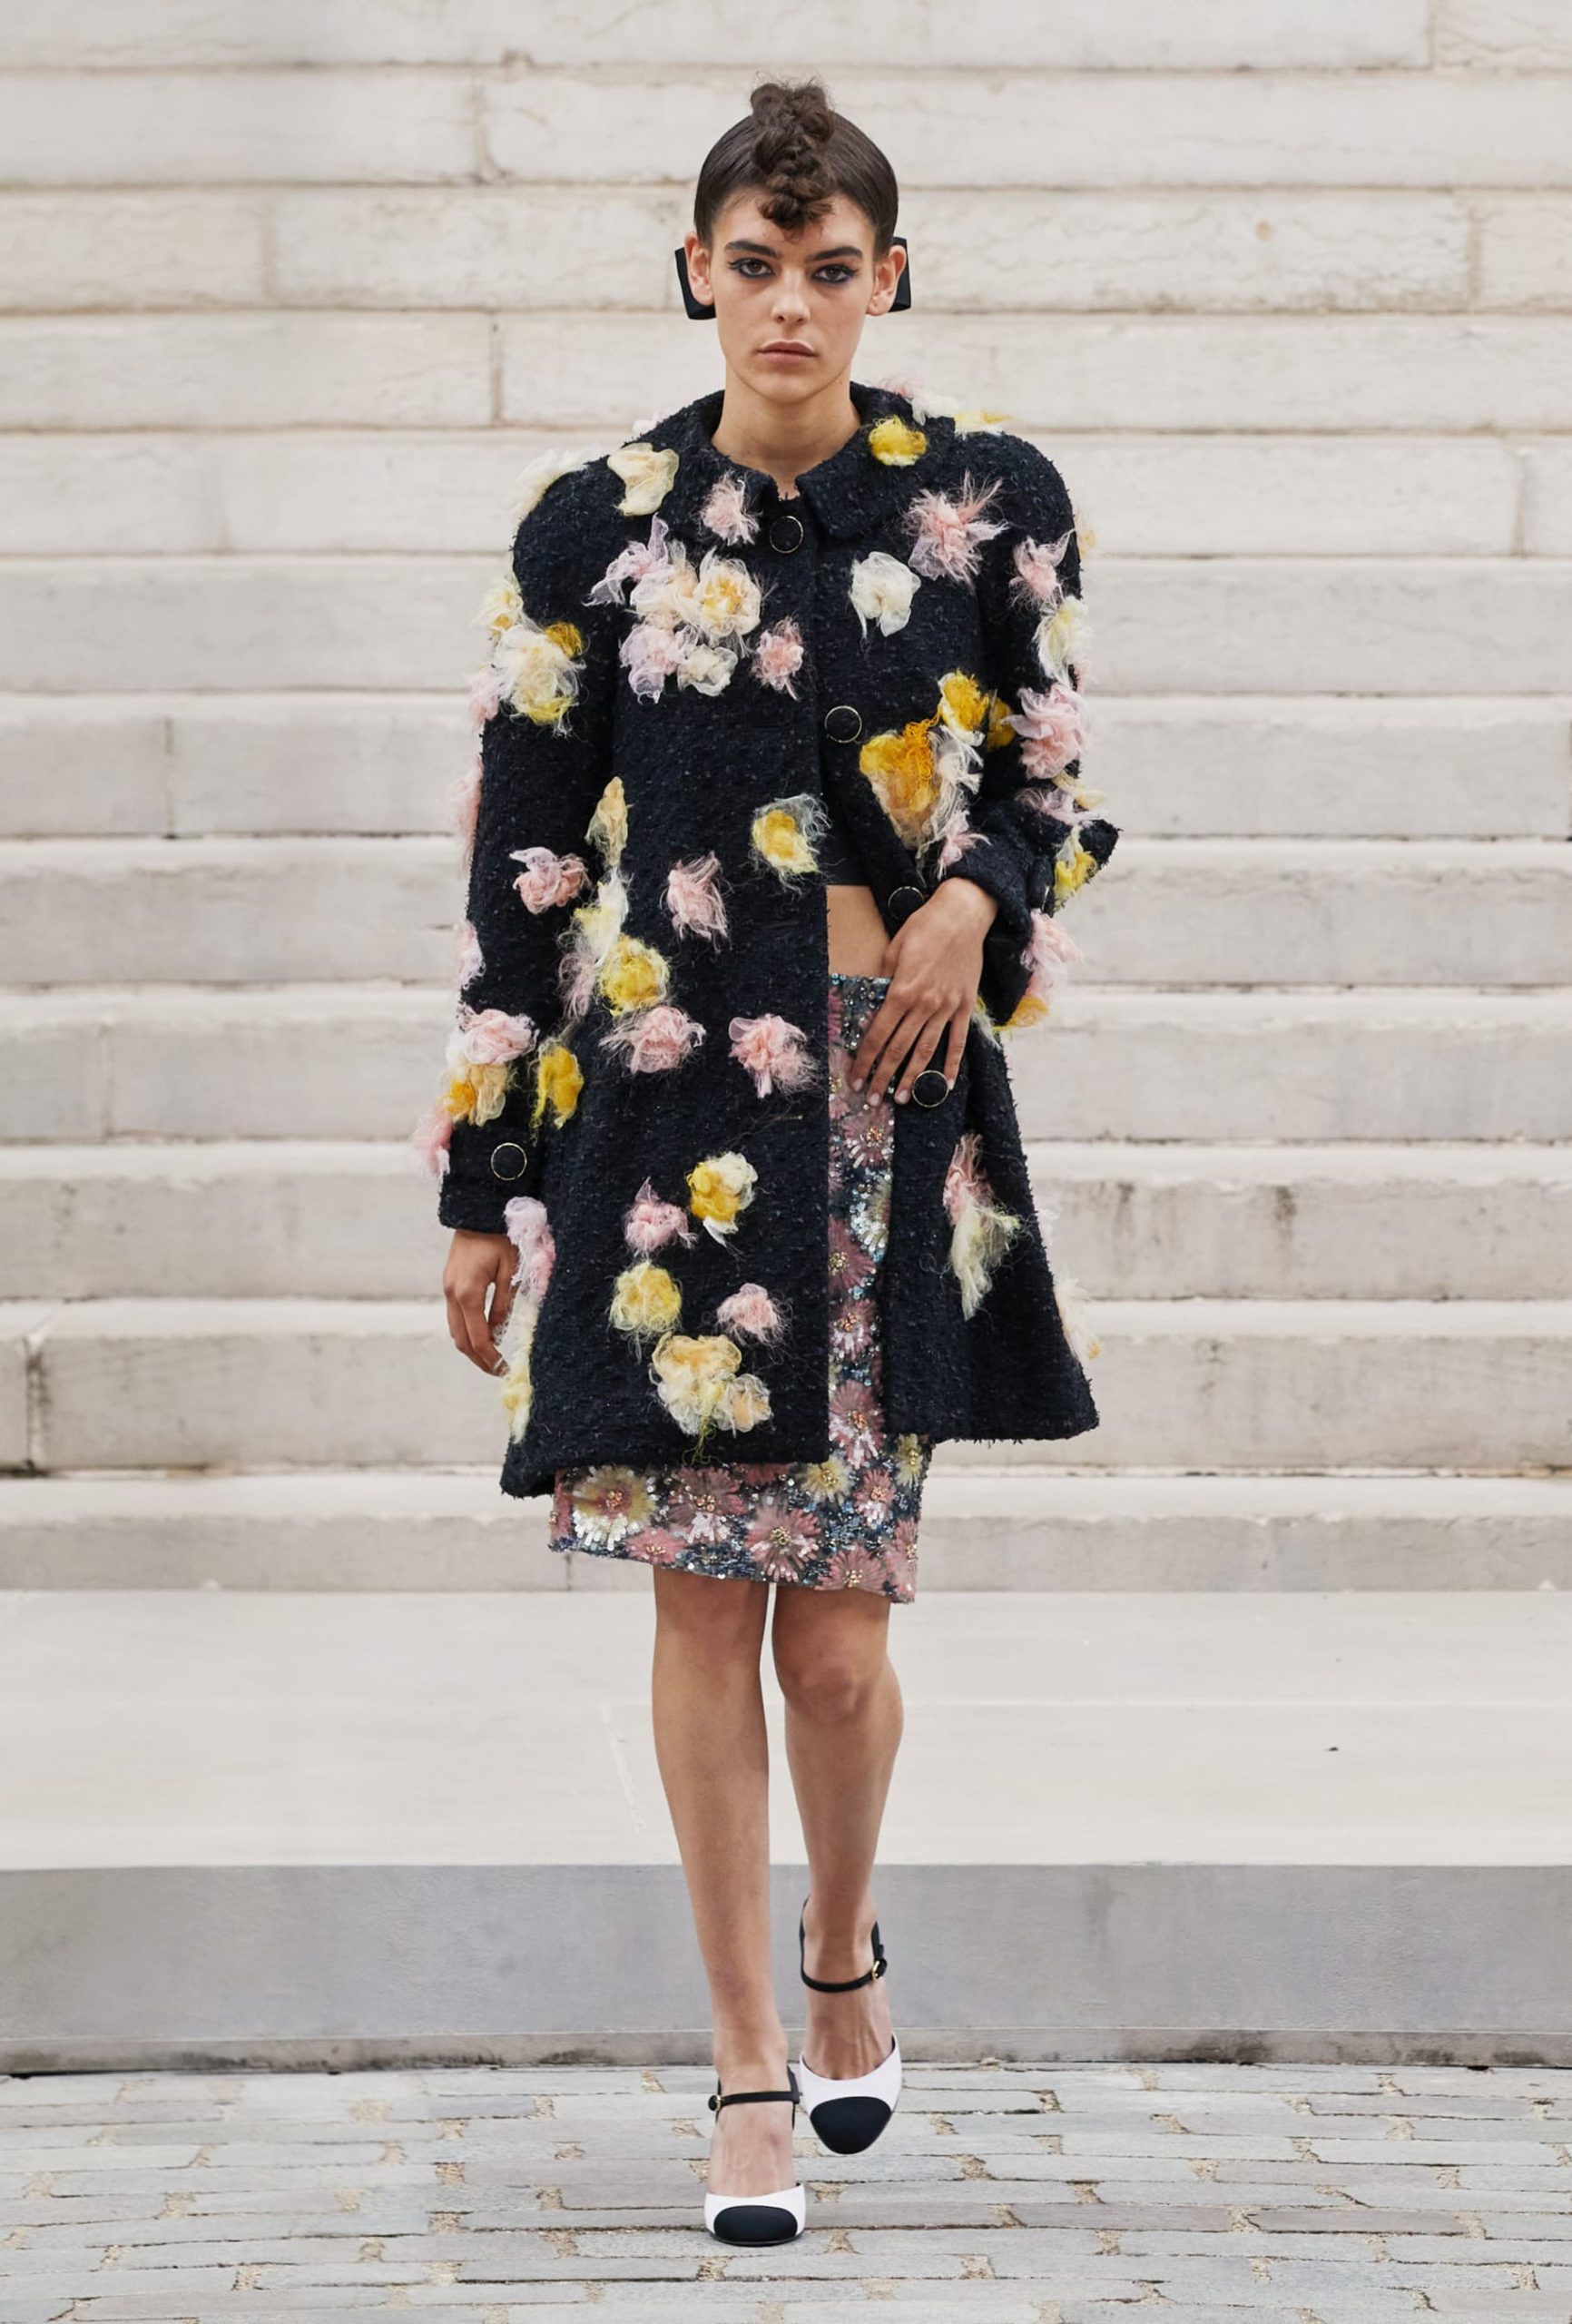 Chanel Fall 2021 Couture Fashion Show Review